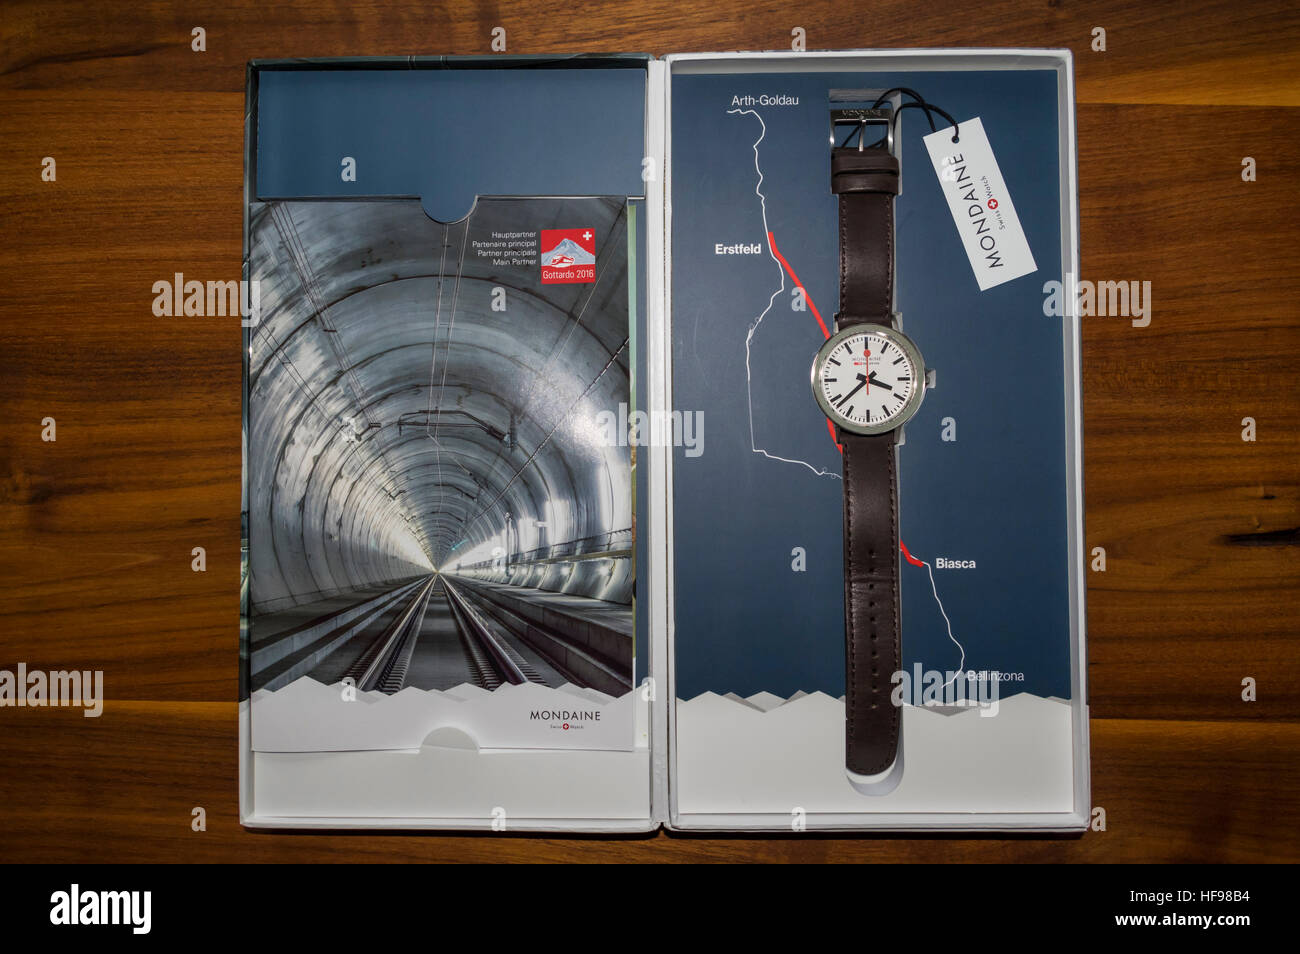 Mondaine stop2go, the Official Swiss Railways Watch. Gottardo 2016 edition, commemorating the Gotthard base tunnel opening. Stock Photo